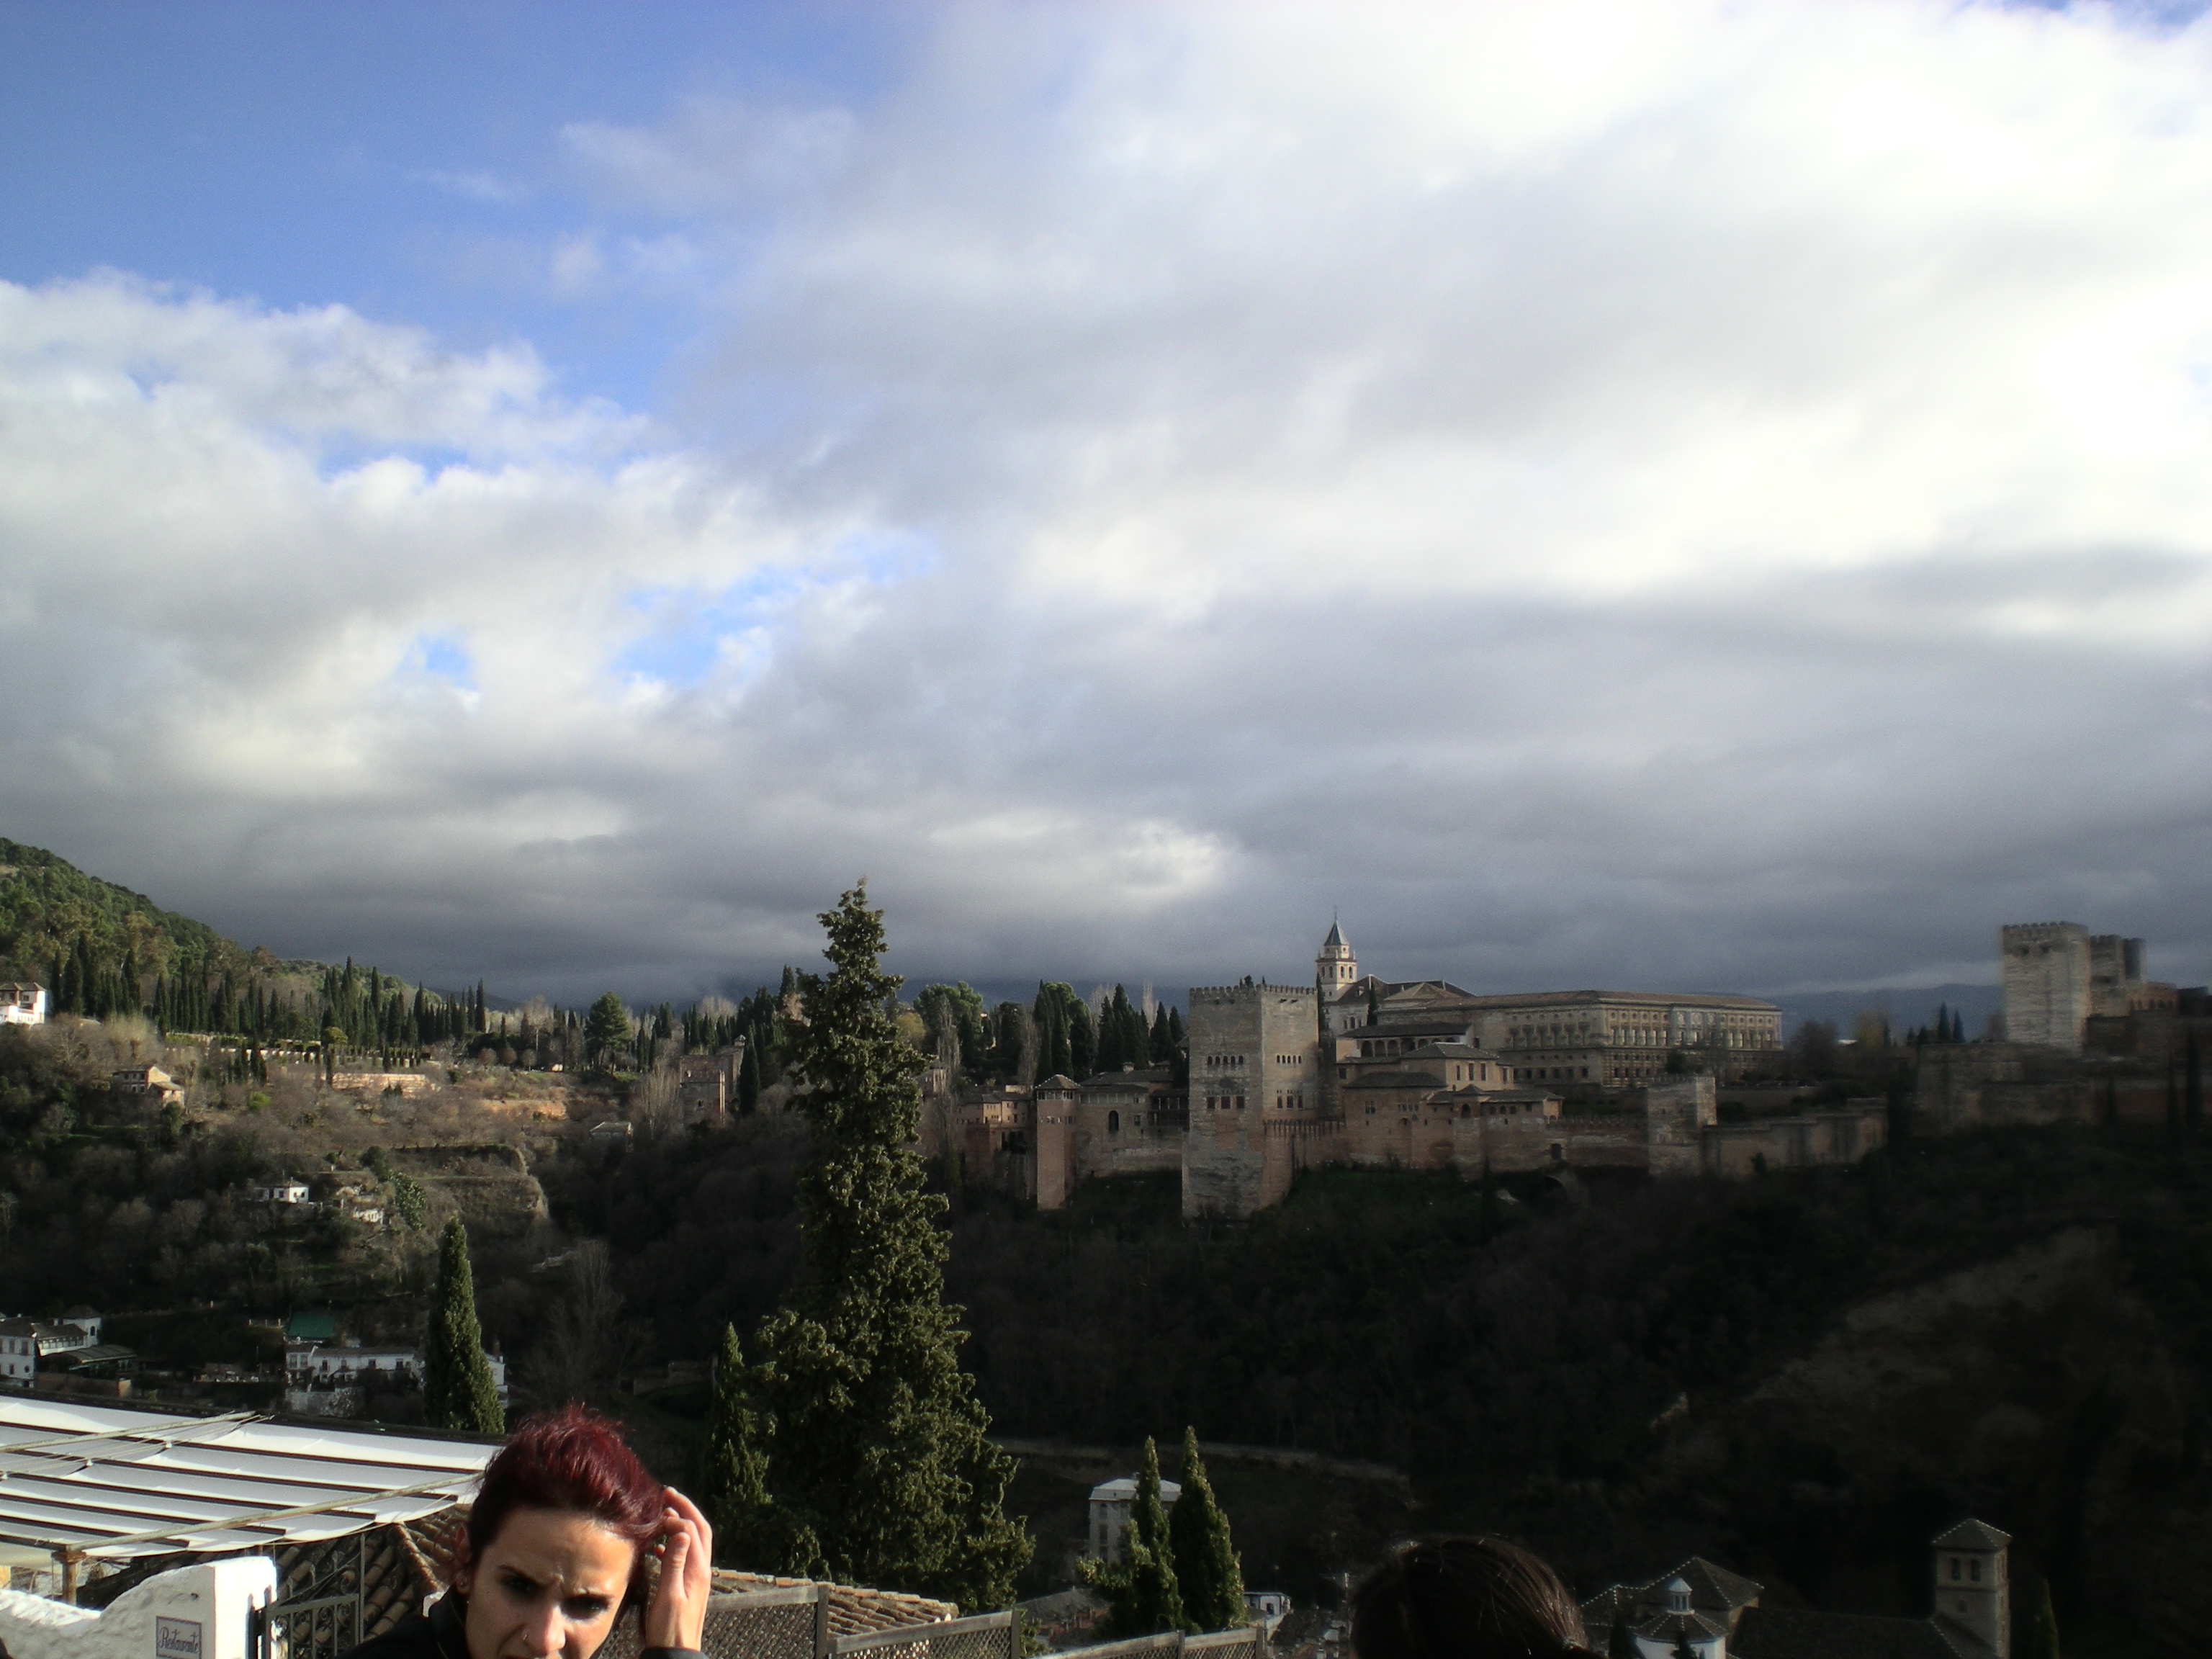 The sky above La Alhambra is just gorgeous from here. 